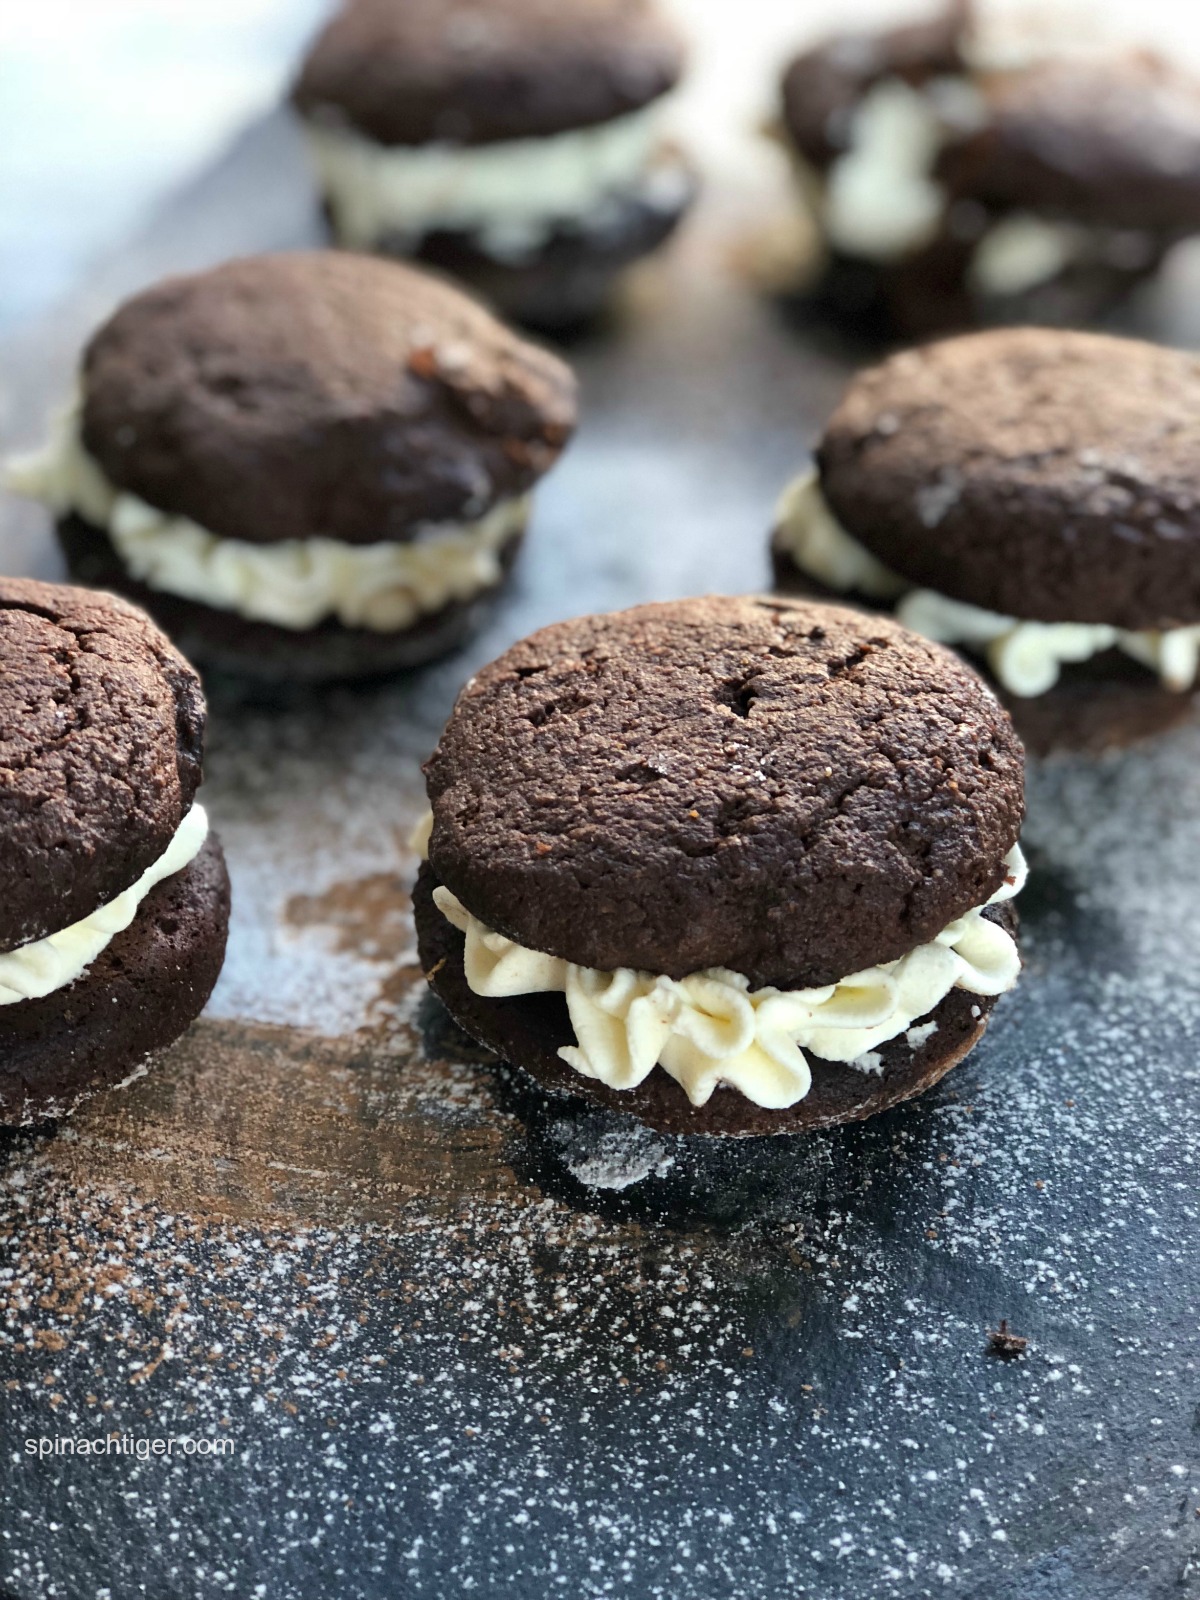 Grain Free Chocolate Whoopie Pie, Sugar Free from Spinach Tiger